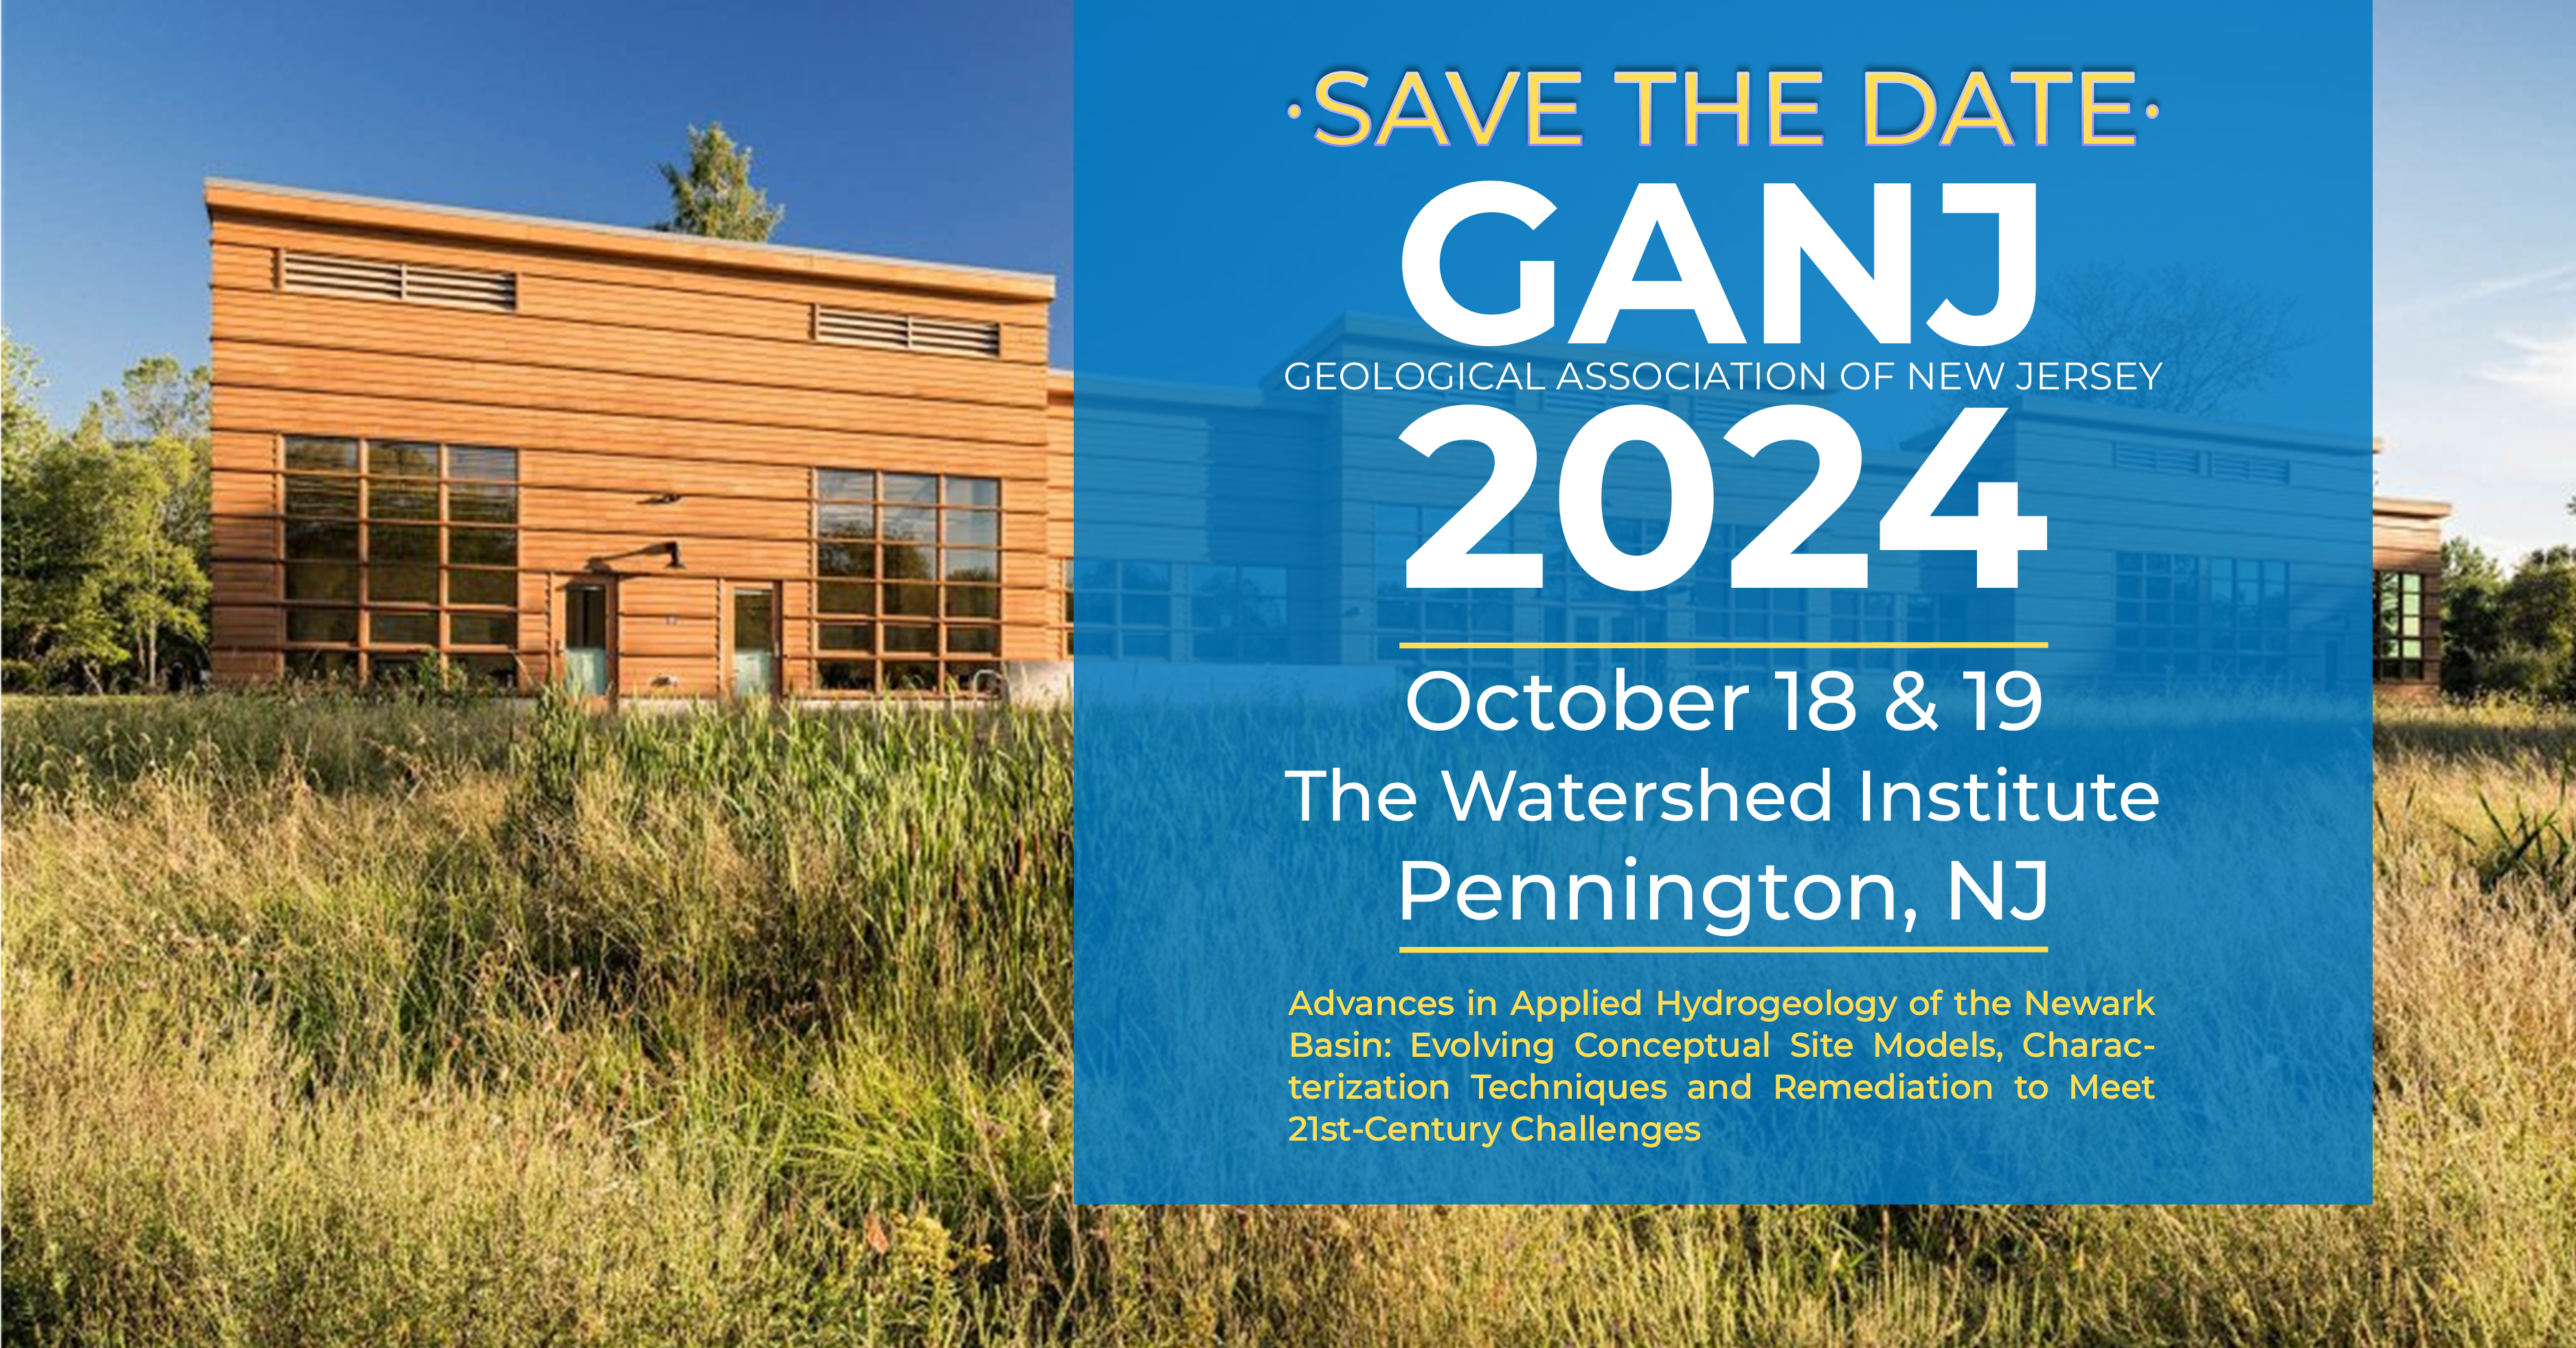 Save the Date for GANJ 2024, October 18 and 19 at the Watershed Institute in Pennington, New Jersey. Advances in Applied Hydrogeology of the Newark Basin: Evolving Conceptual Site Models, Characterization Techniques and Remediation to Meet 21st-Century Challenges.